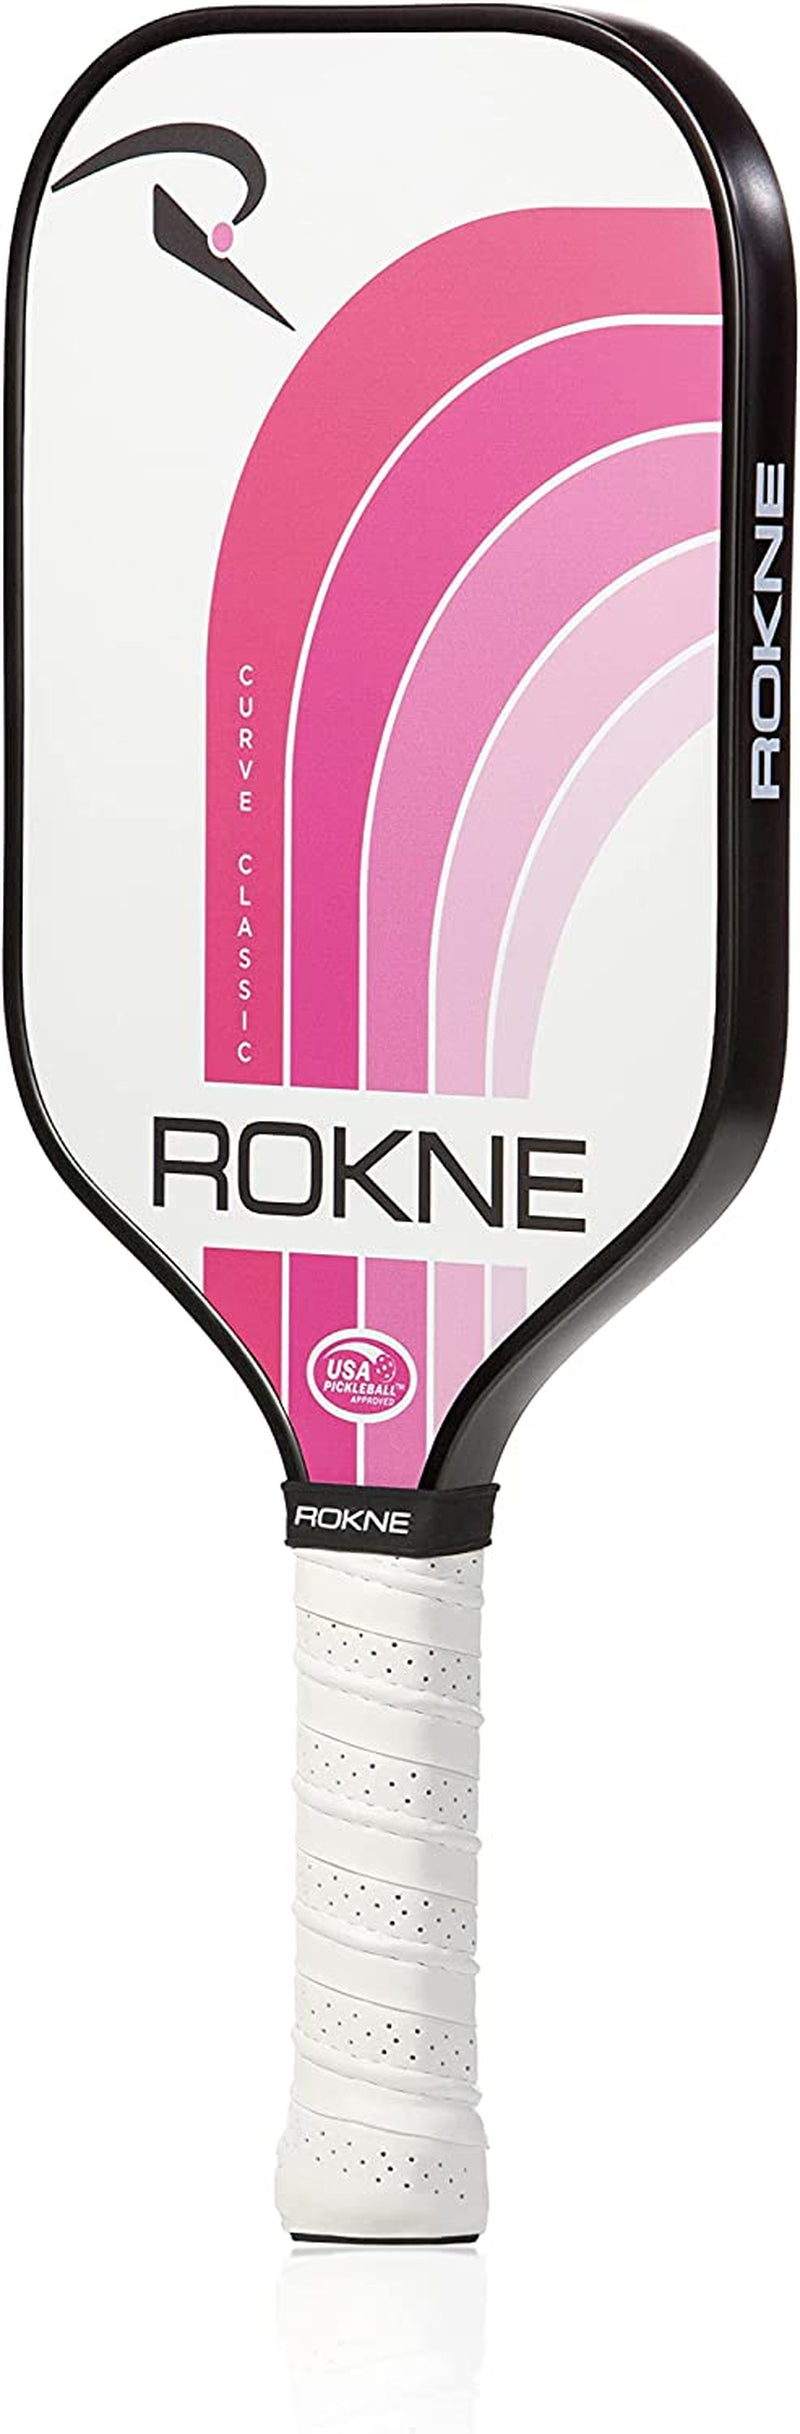 "Master the Game with the Curve Classic Pickleball Paddle - Dominate Your Opponents with Explosive Spin, Precision Control, and Unparalleled Comfort!